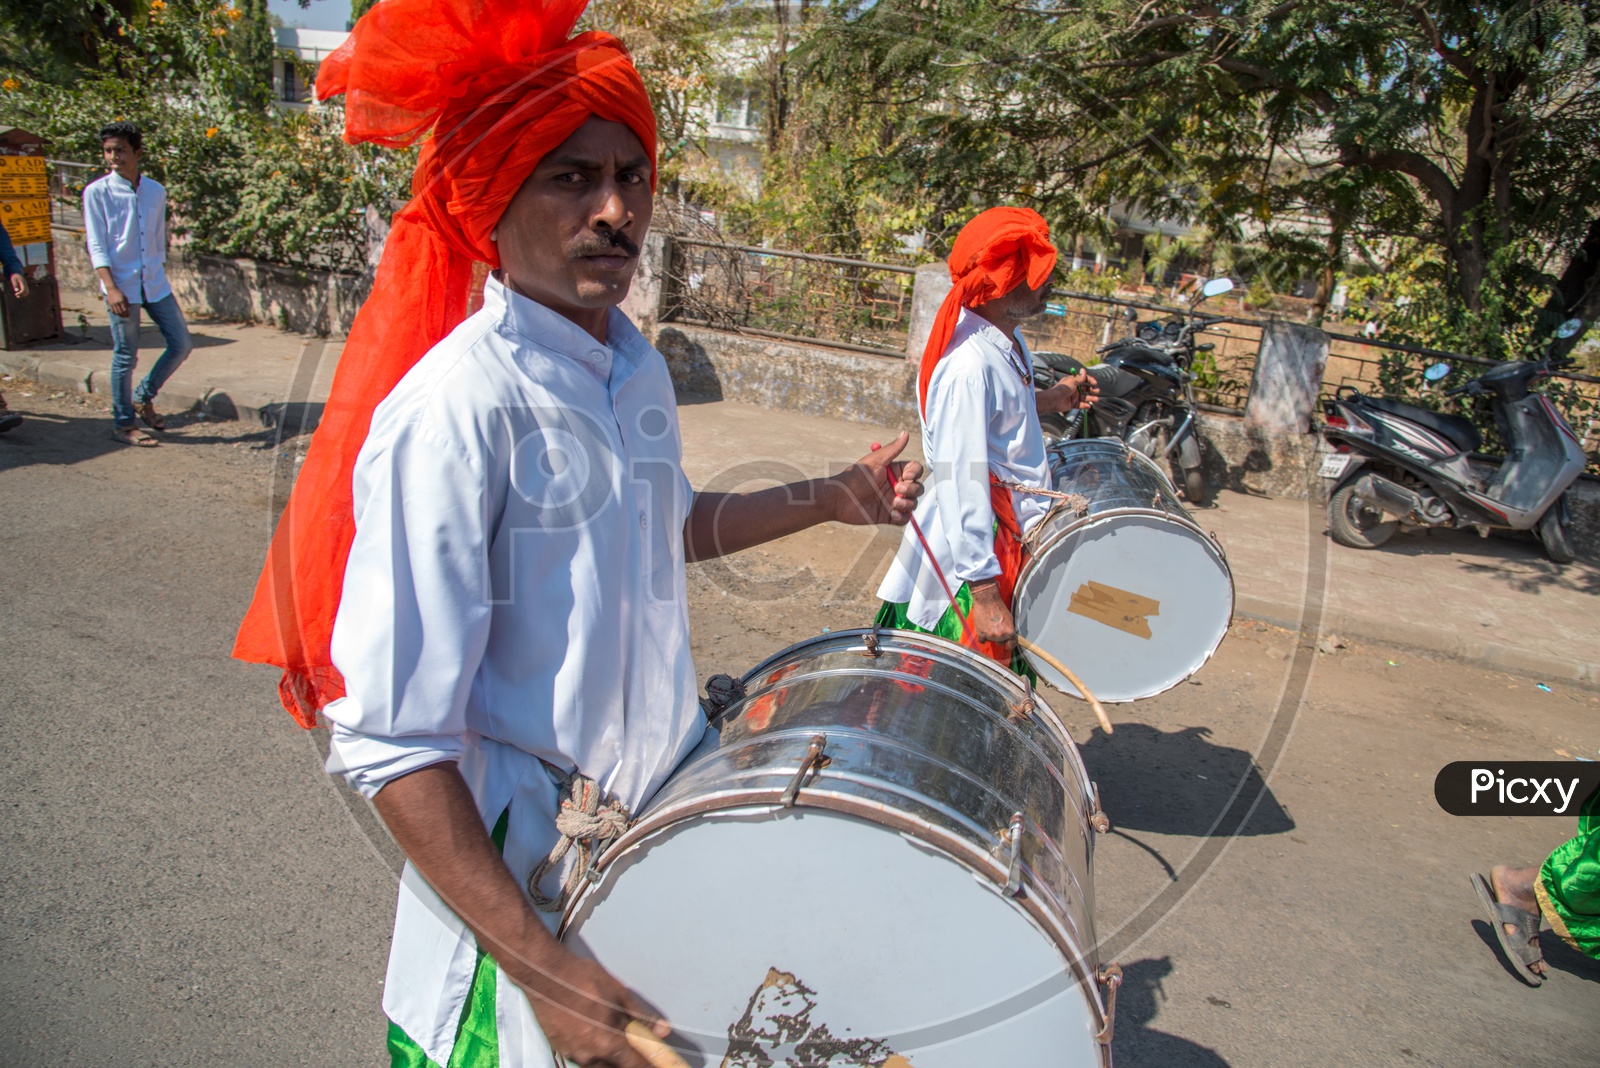 Indian Drum Artists Playing Drums On Indian Streets For The Occasion Of Republic Day Celebrations